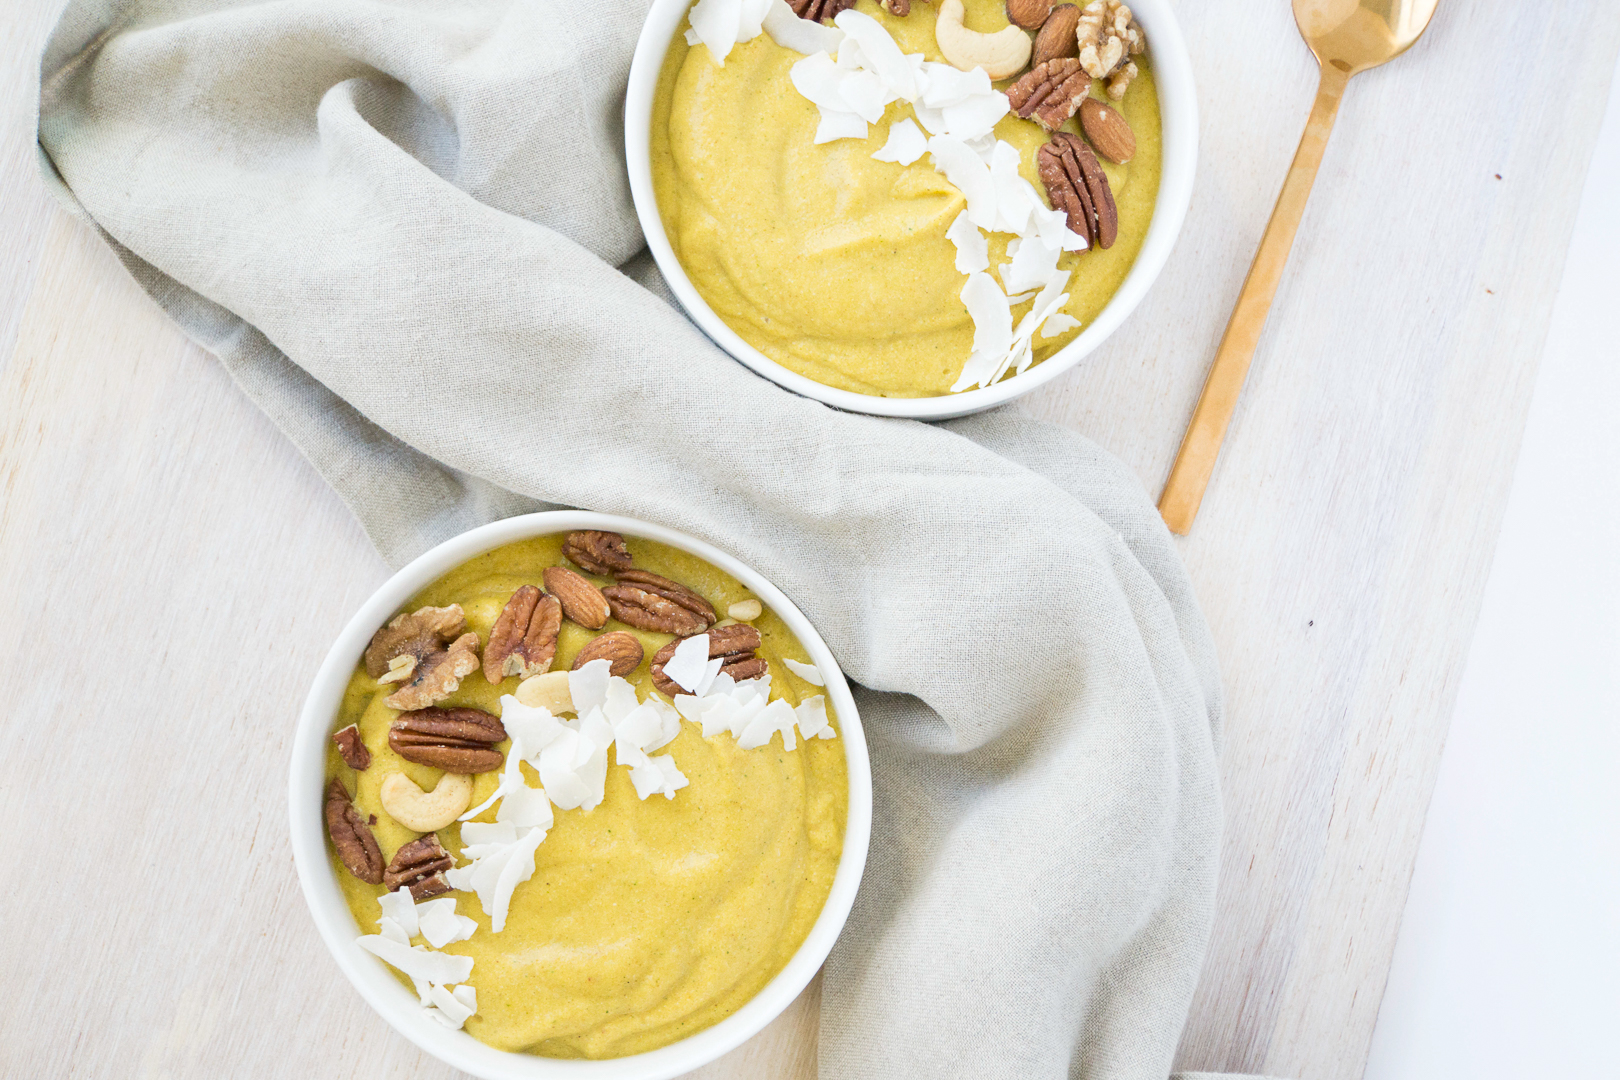 Orange Pumpkin smoothie bowls topped with roasted nuts and coconut flakes, with linen napkins